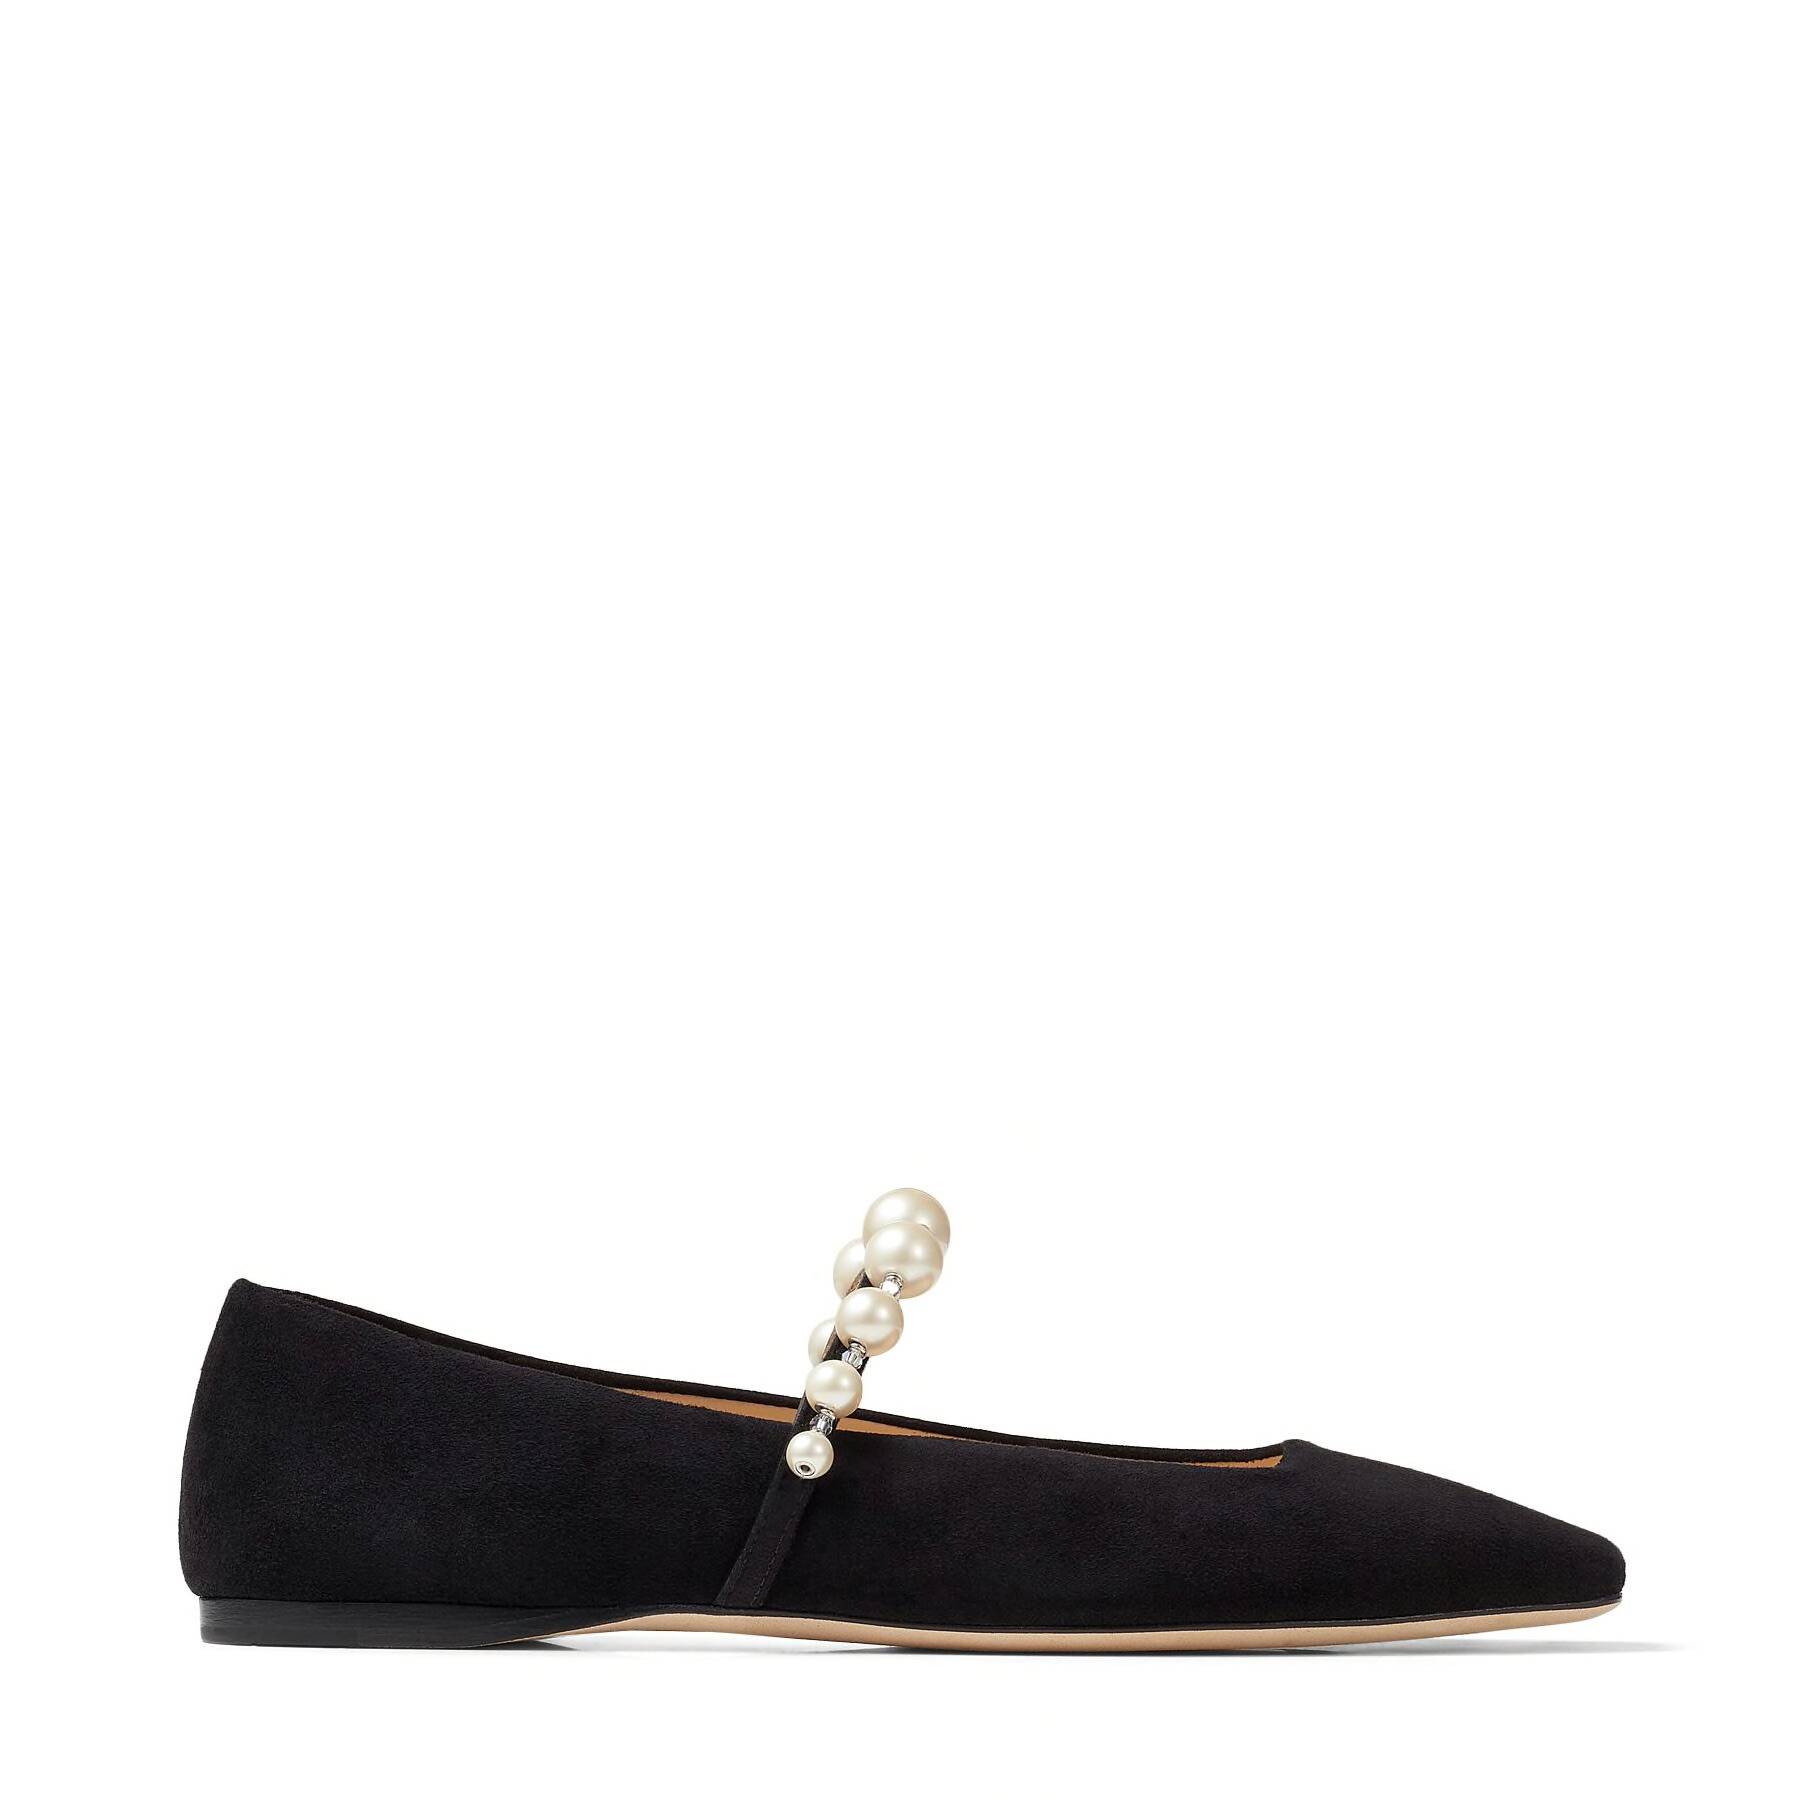 The 25 Best Ballet Flats That Look the Chic French Part Who What Wear UK